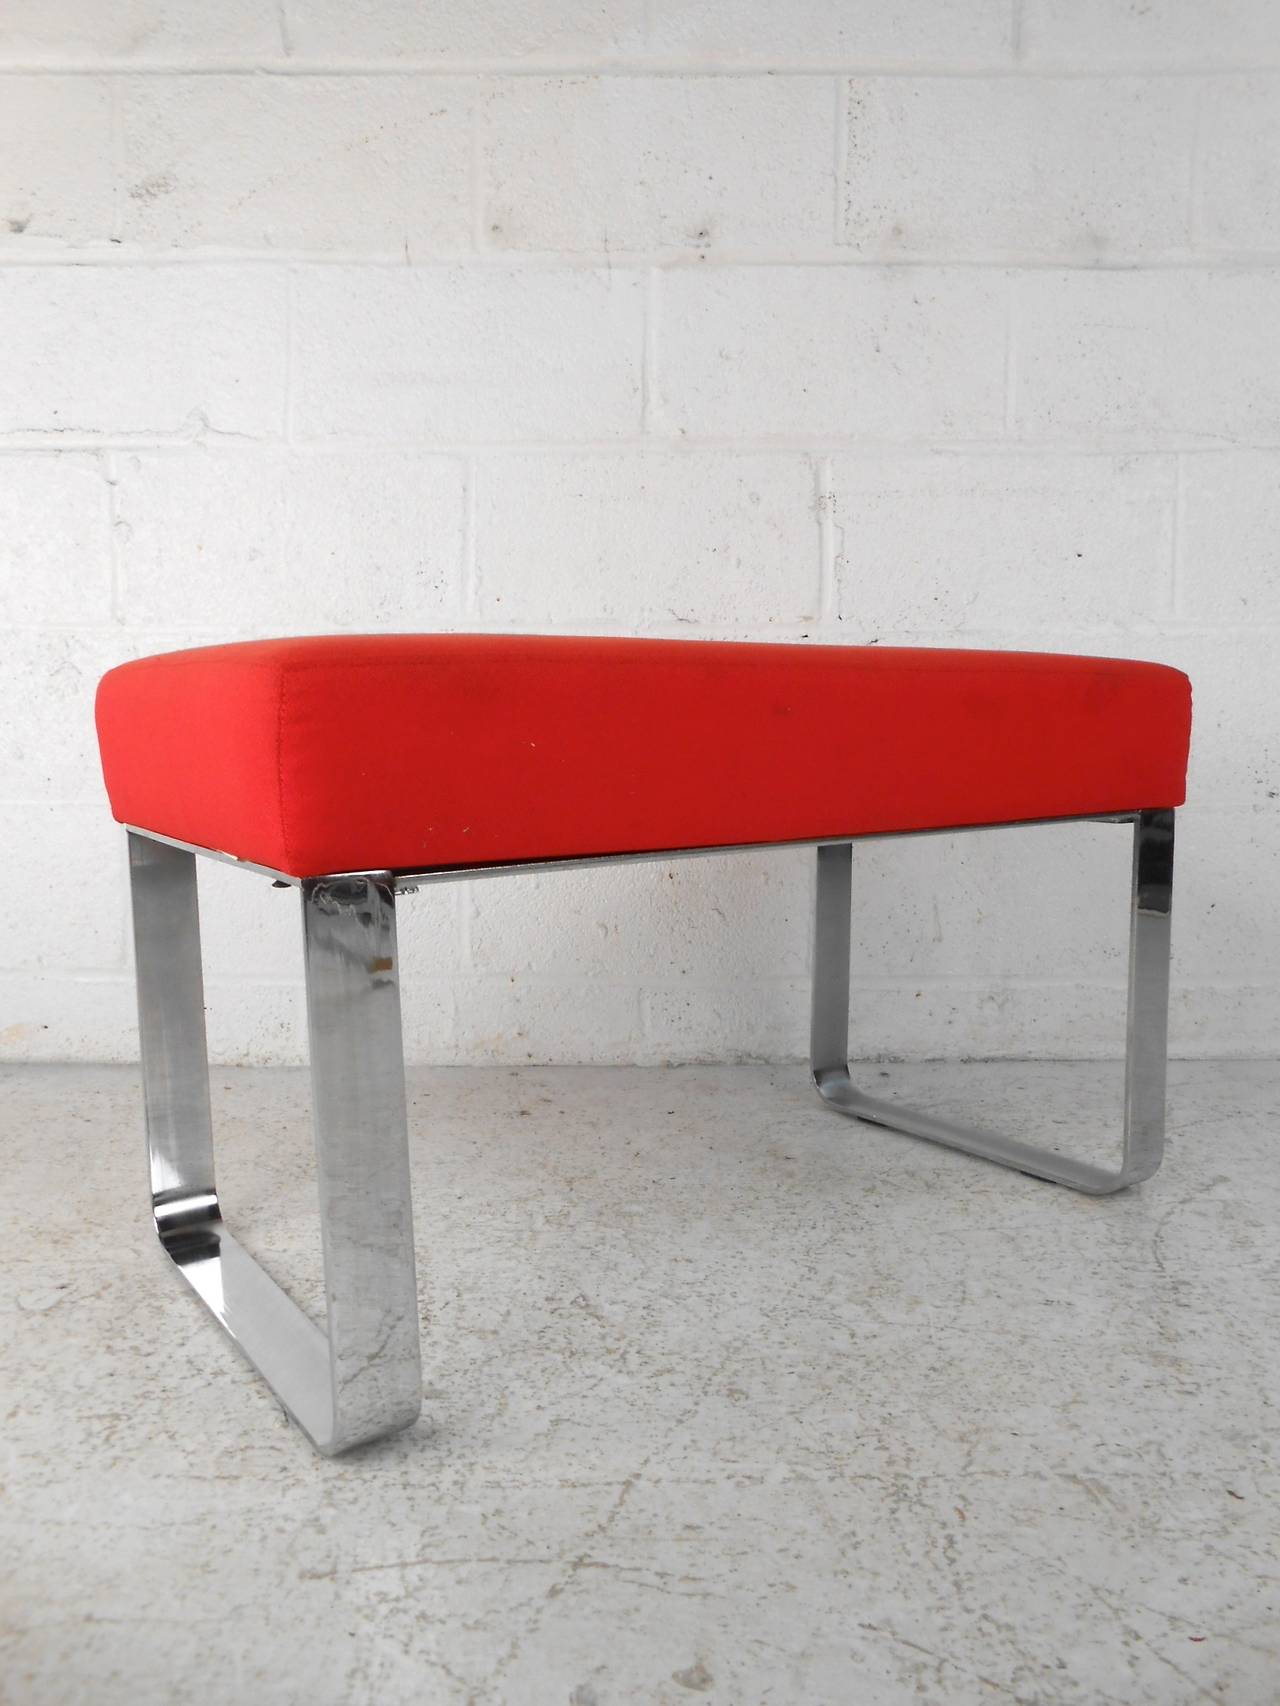 This mid-century modern ottoman features bright red upholstery with a sturdy chrome base that offer comfortable occasional seating to any home or office space.

Please confirm item location (NY or NJ) with dealer.